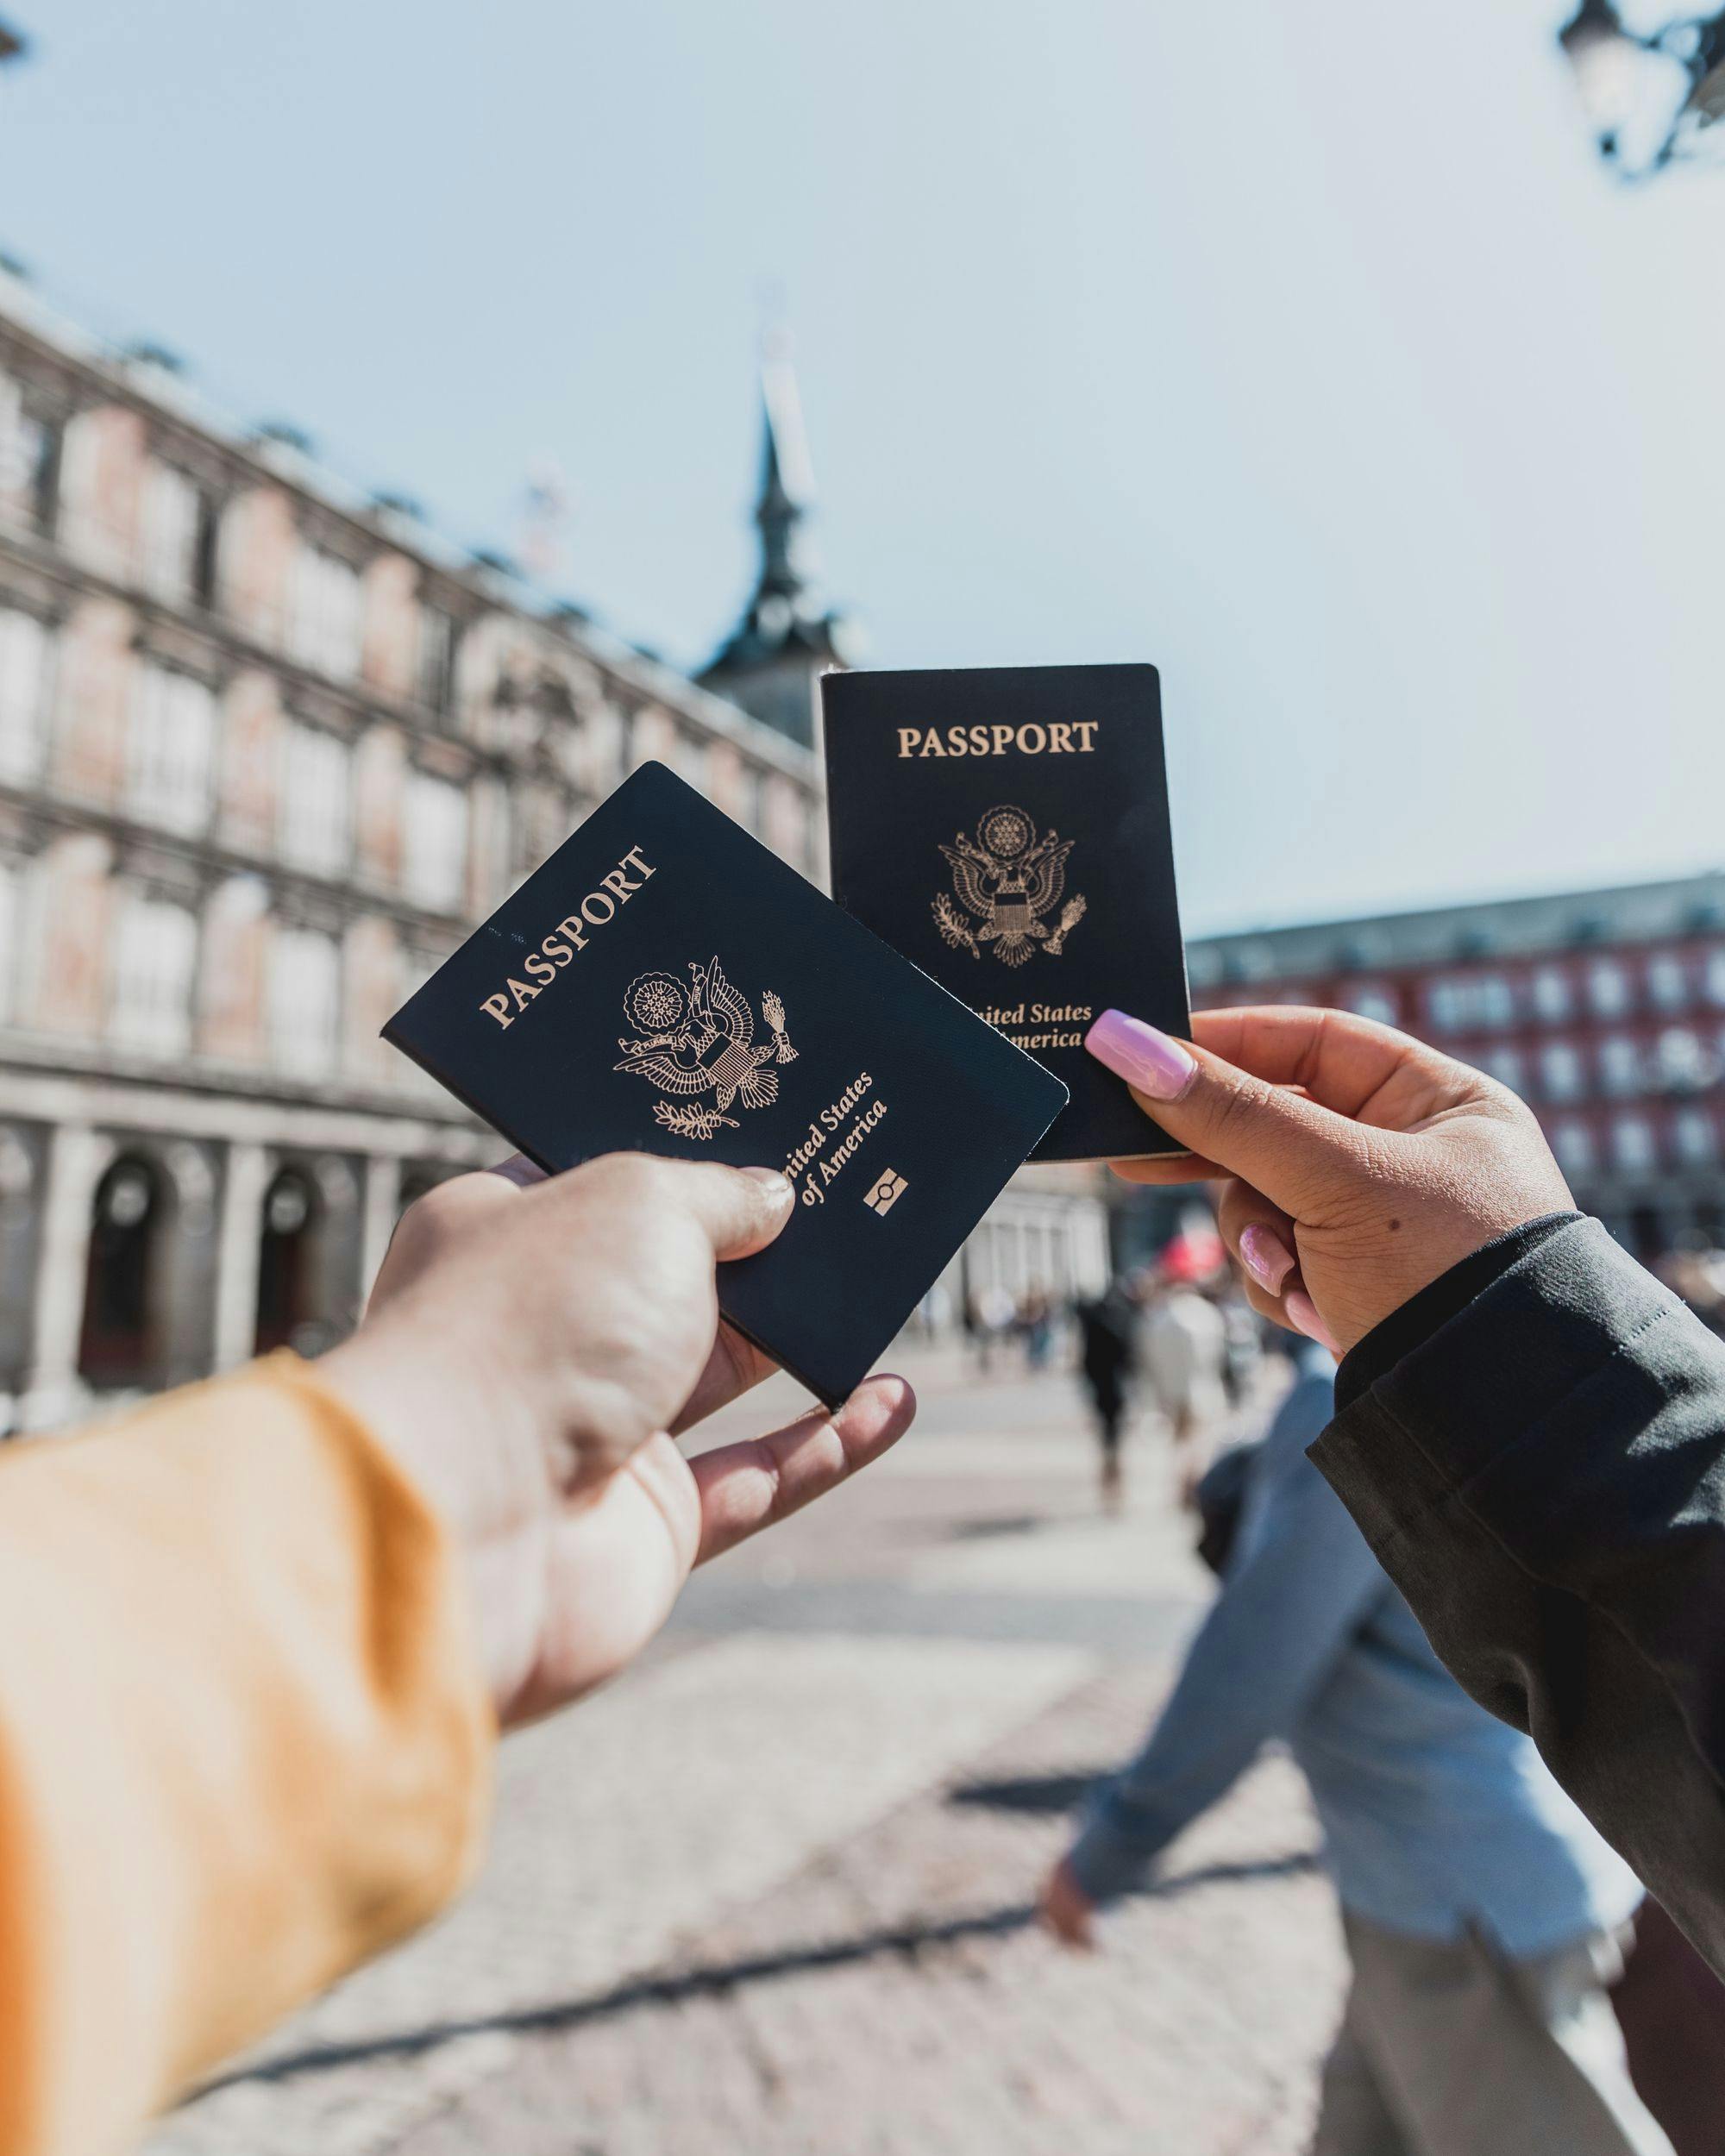 two-hands-holiding-passports-in-european-town-people-in-background